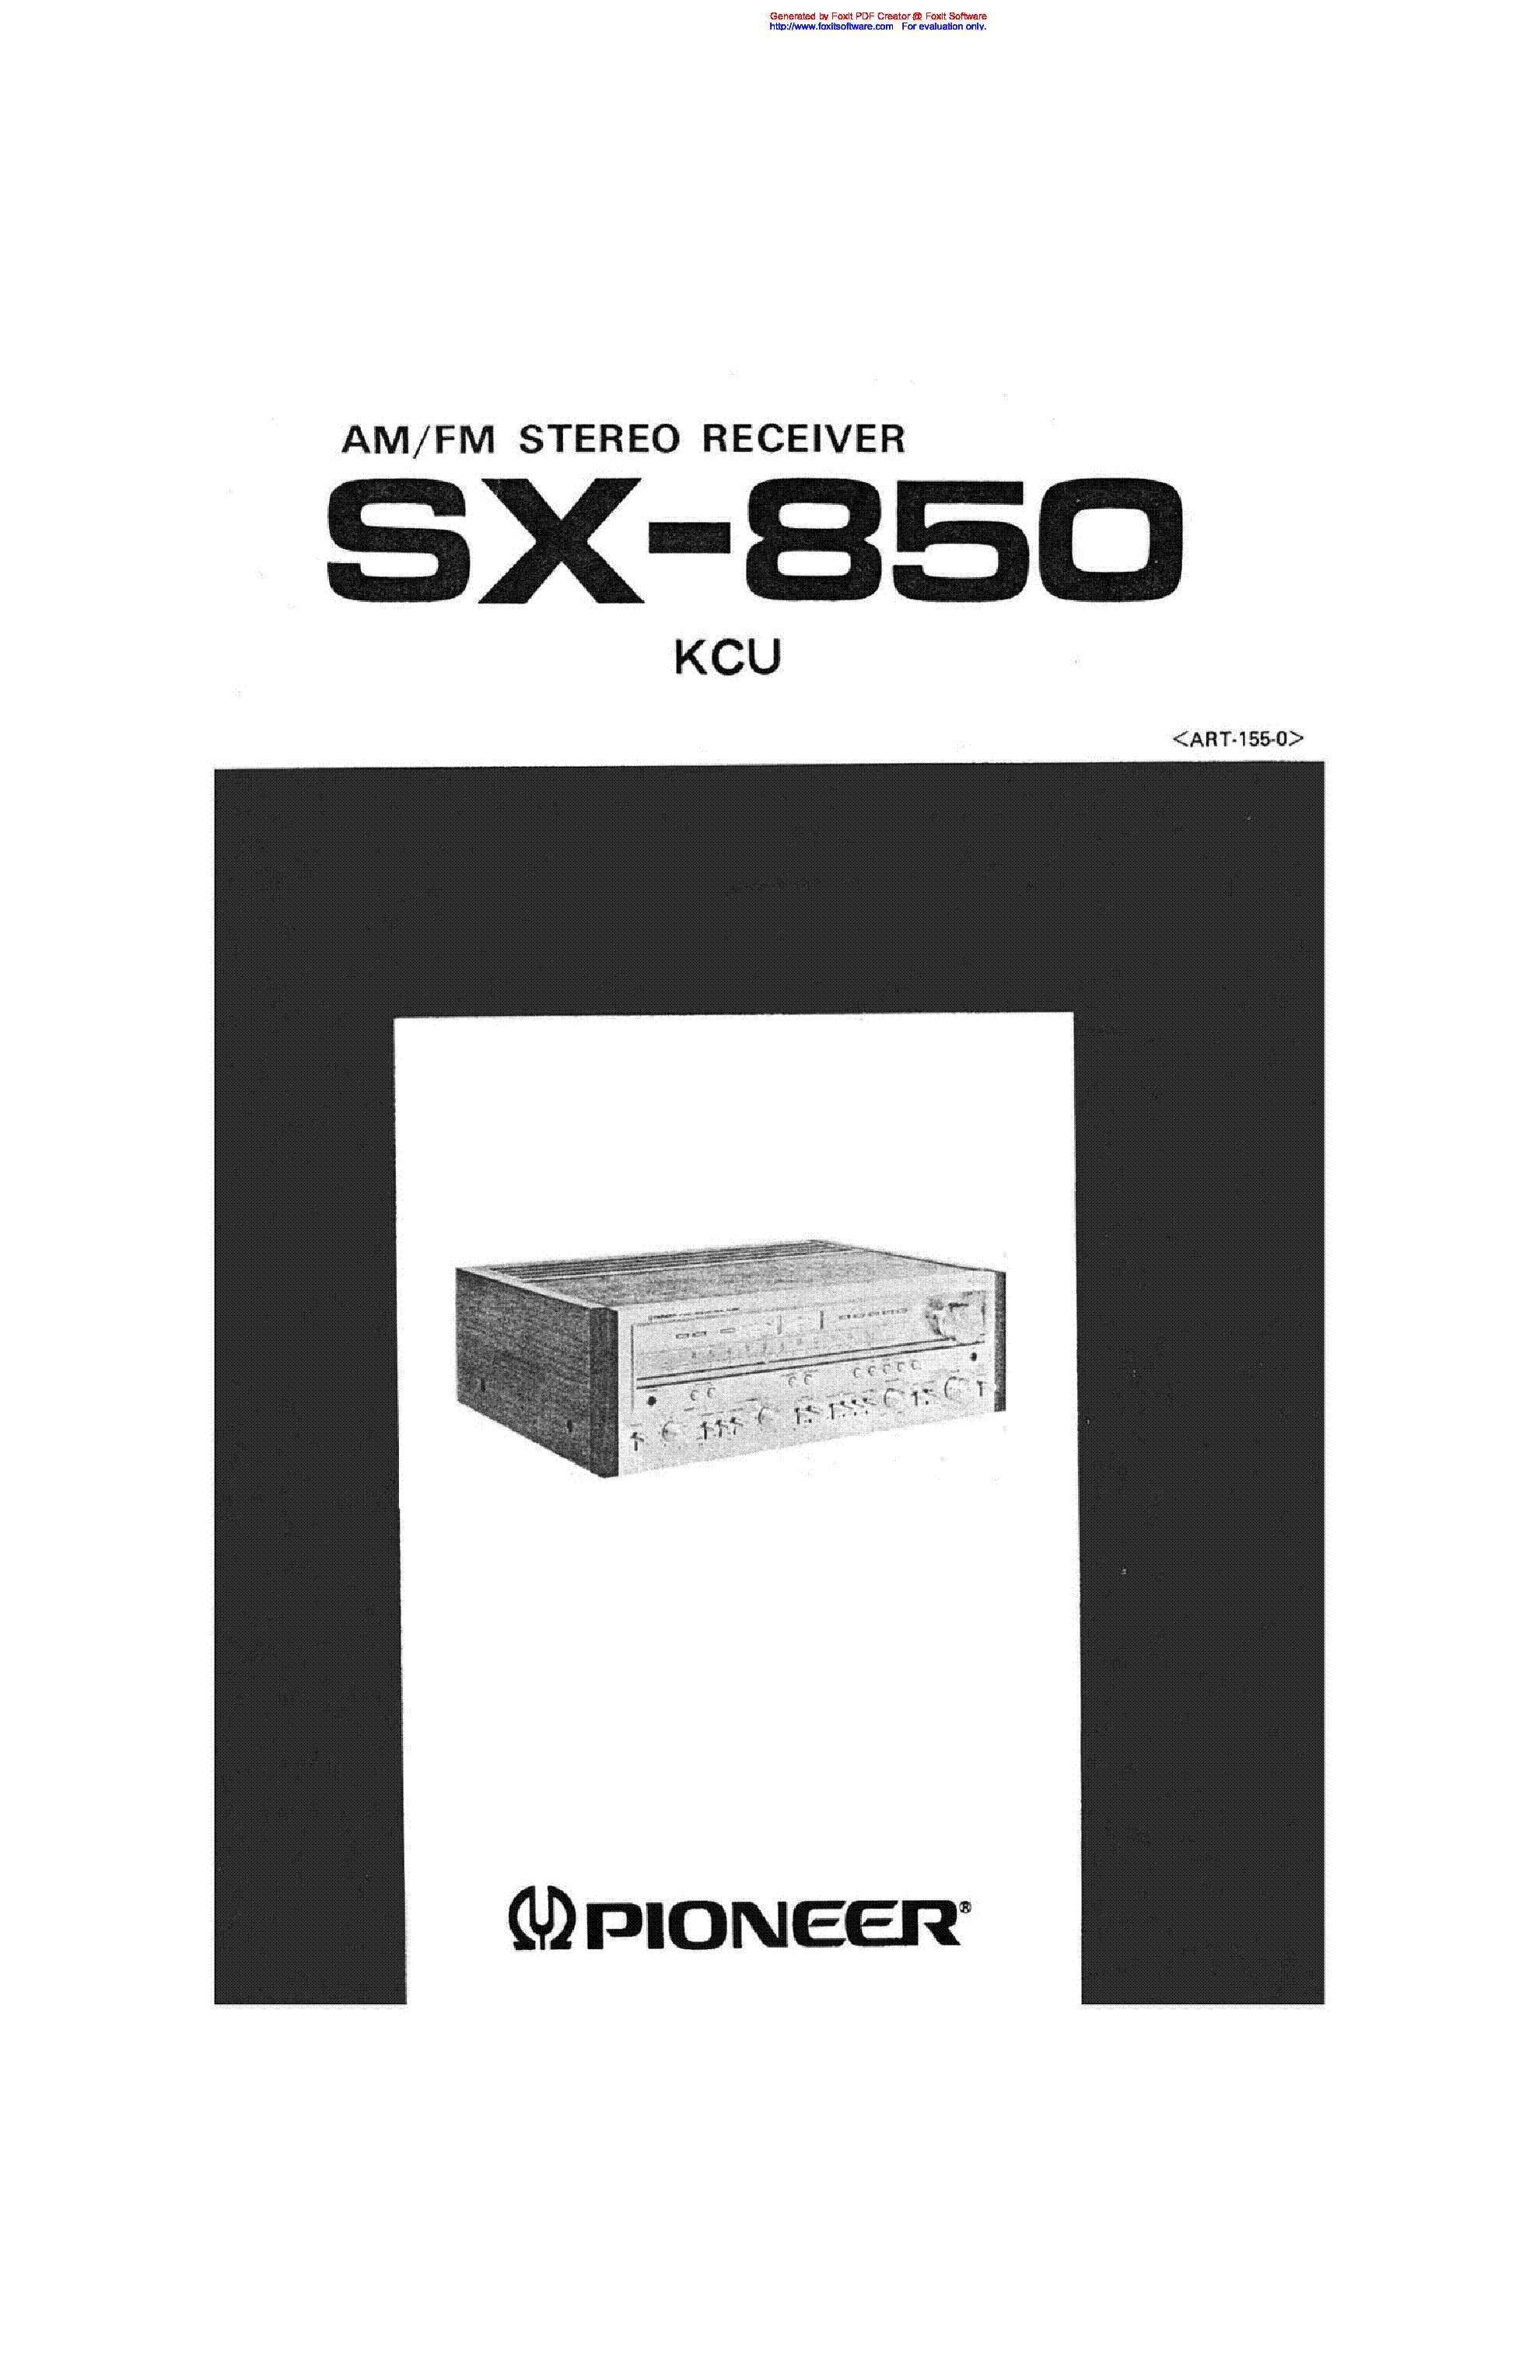 PIONEER SX-850 SM service manual (1st page)